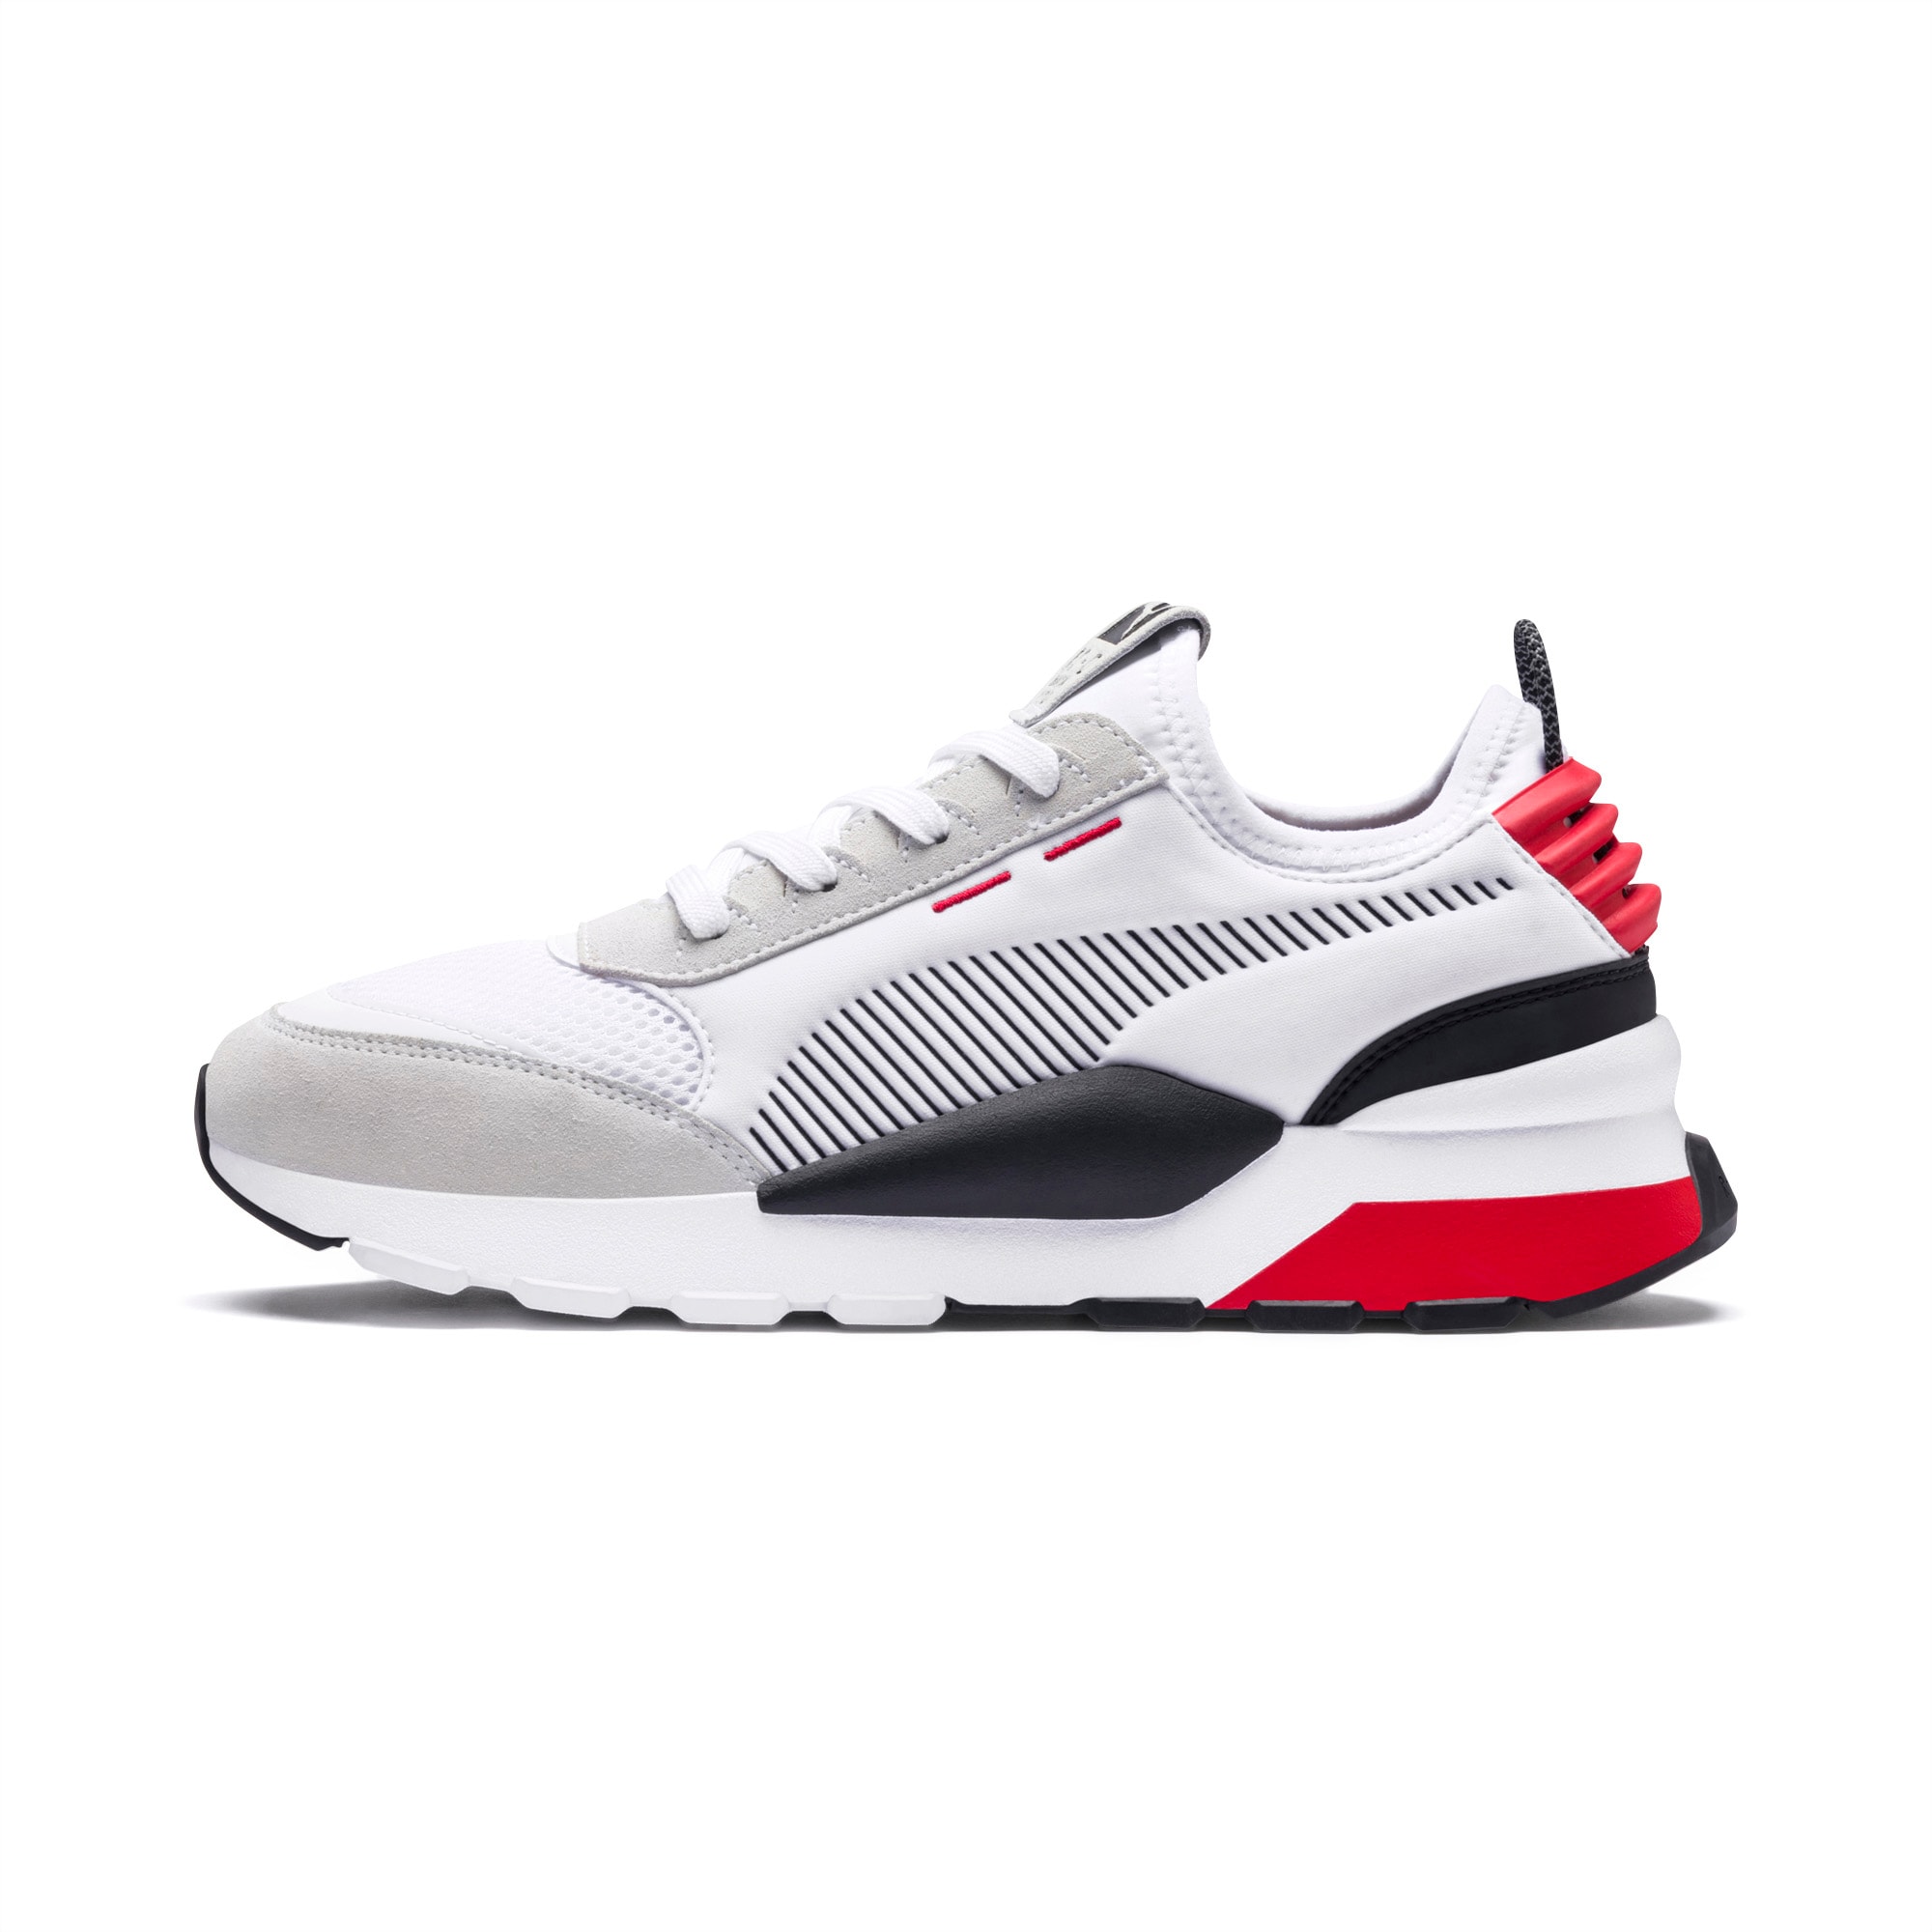 RS-0 Winter Inj Toys Trainers | Puma 